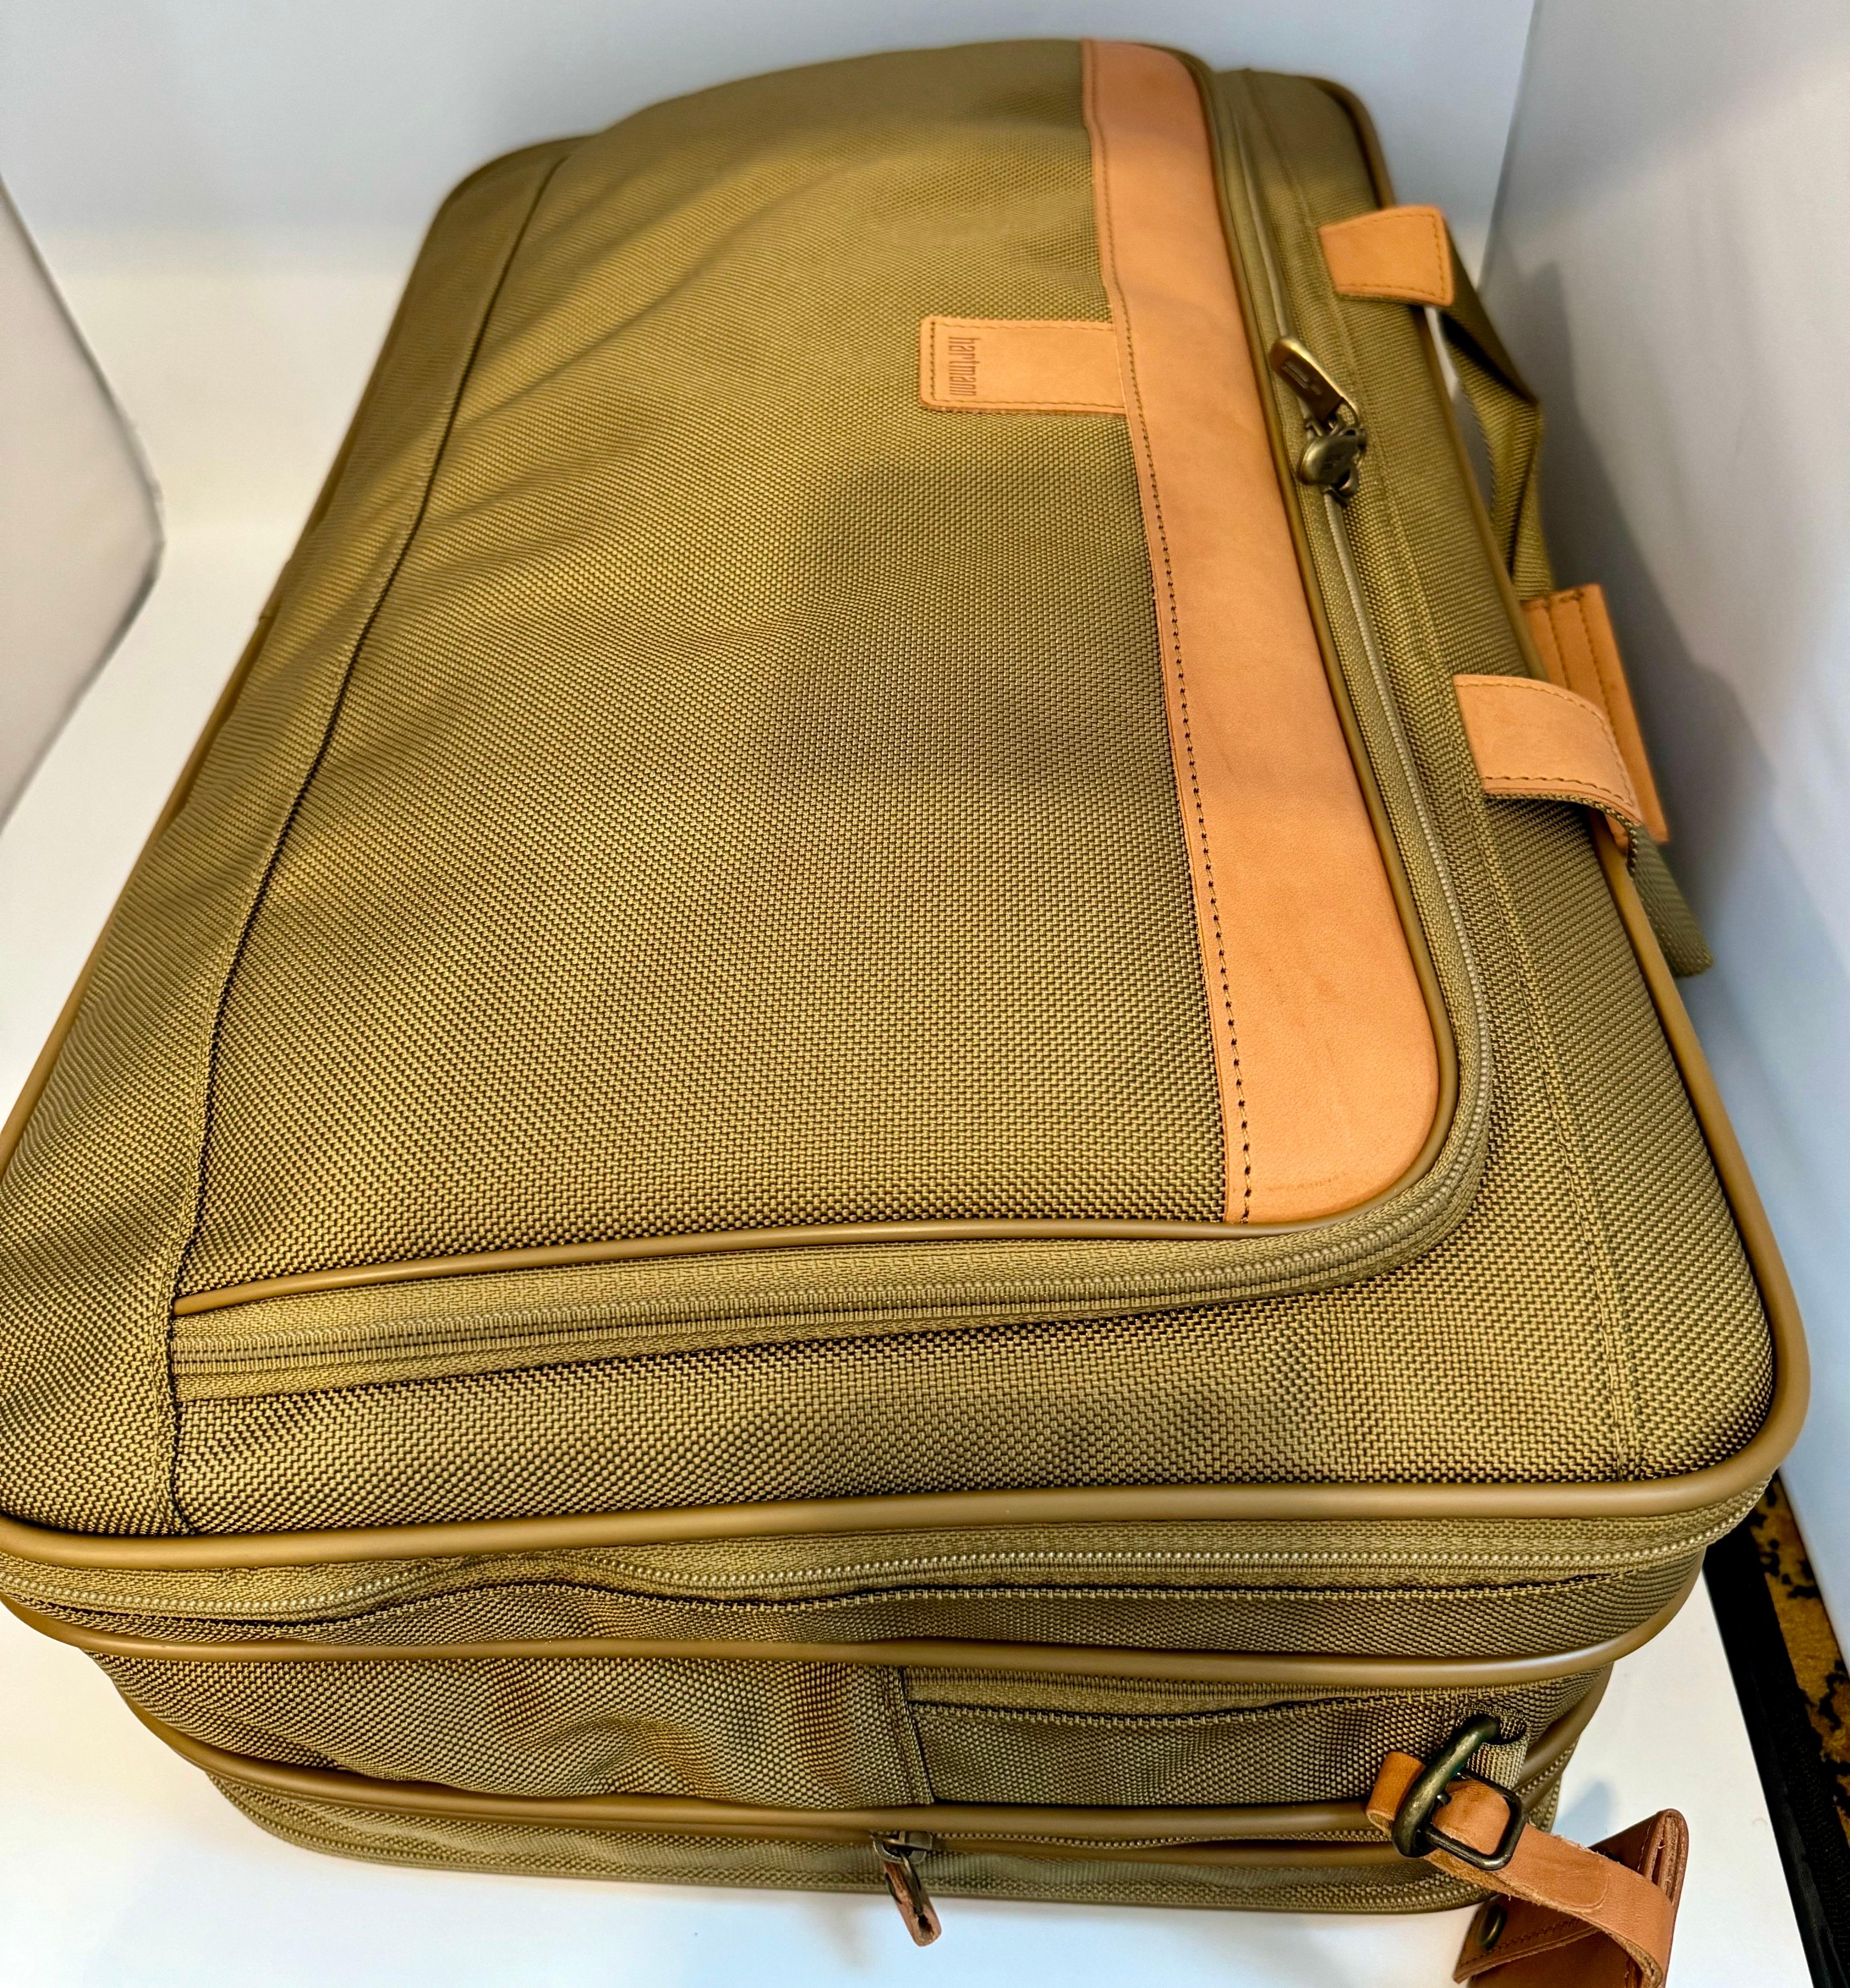 Vintage Hartman Carryon Soft suitcase with Three Zip Exp , Brand New in a Box
Purchased from Bloomingdale
Hartmann carry on suitcase , travel bag New In Box! 
Please look for the matching carry on and  garment bag with other pieces in separate